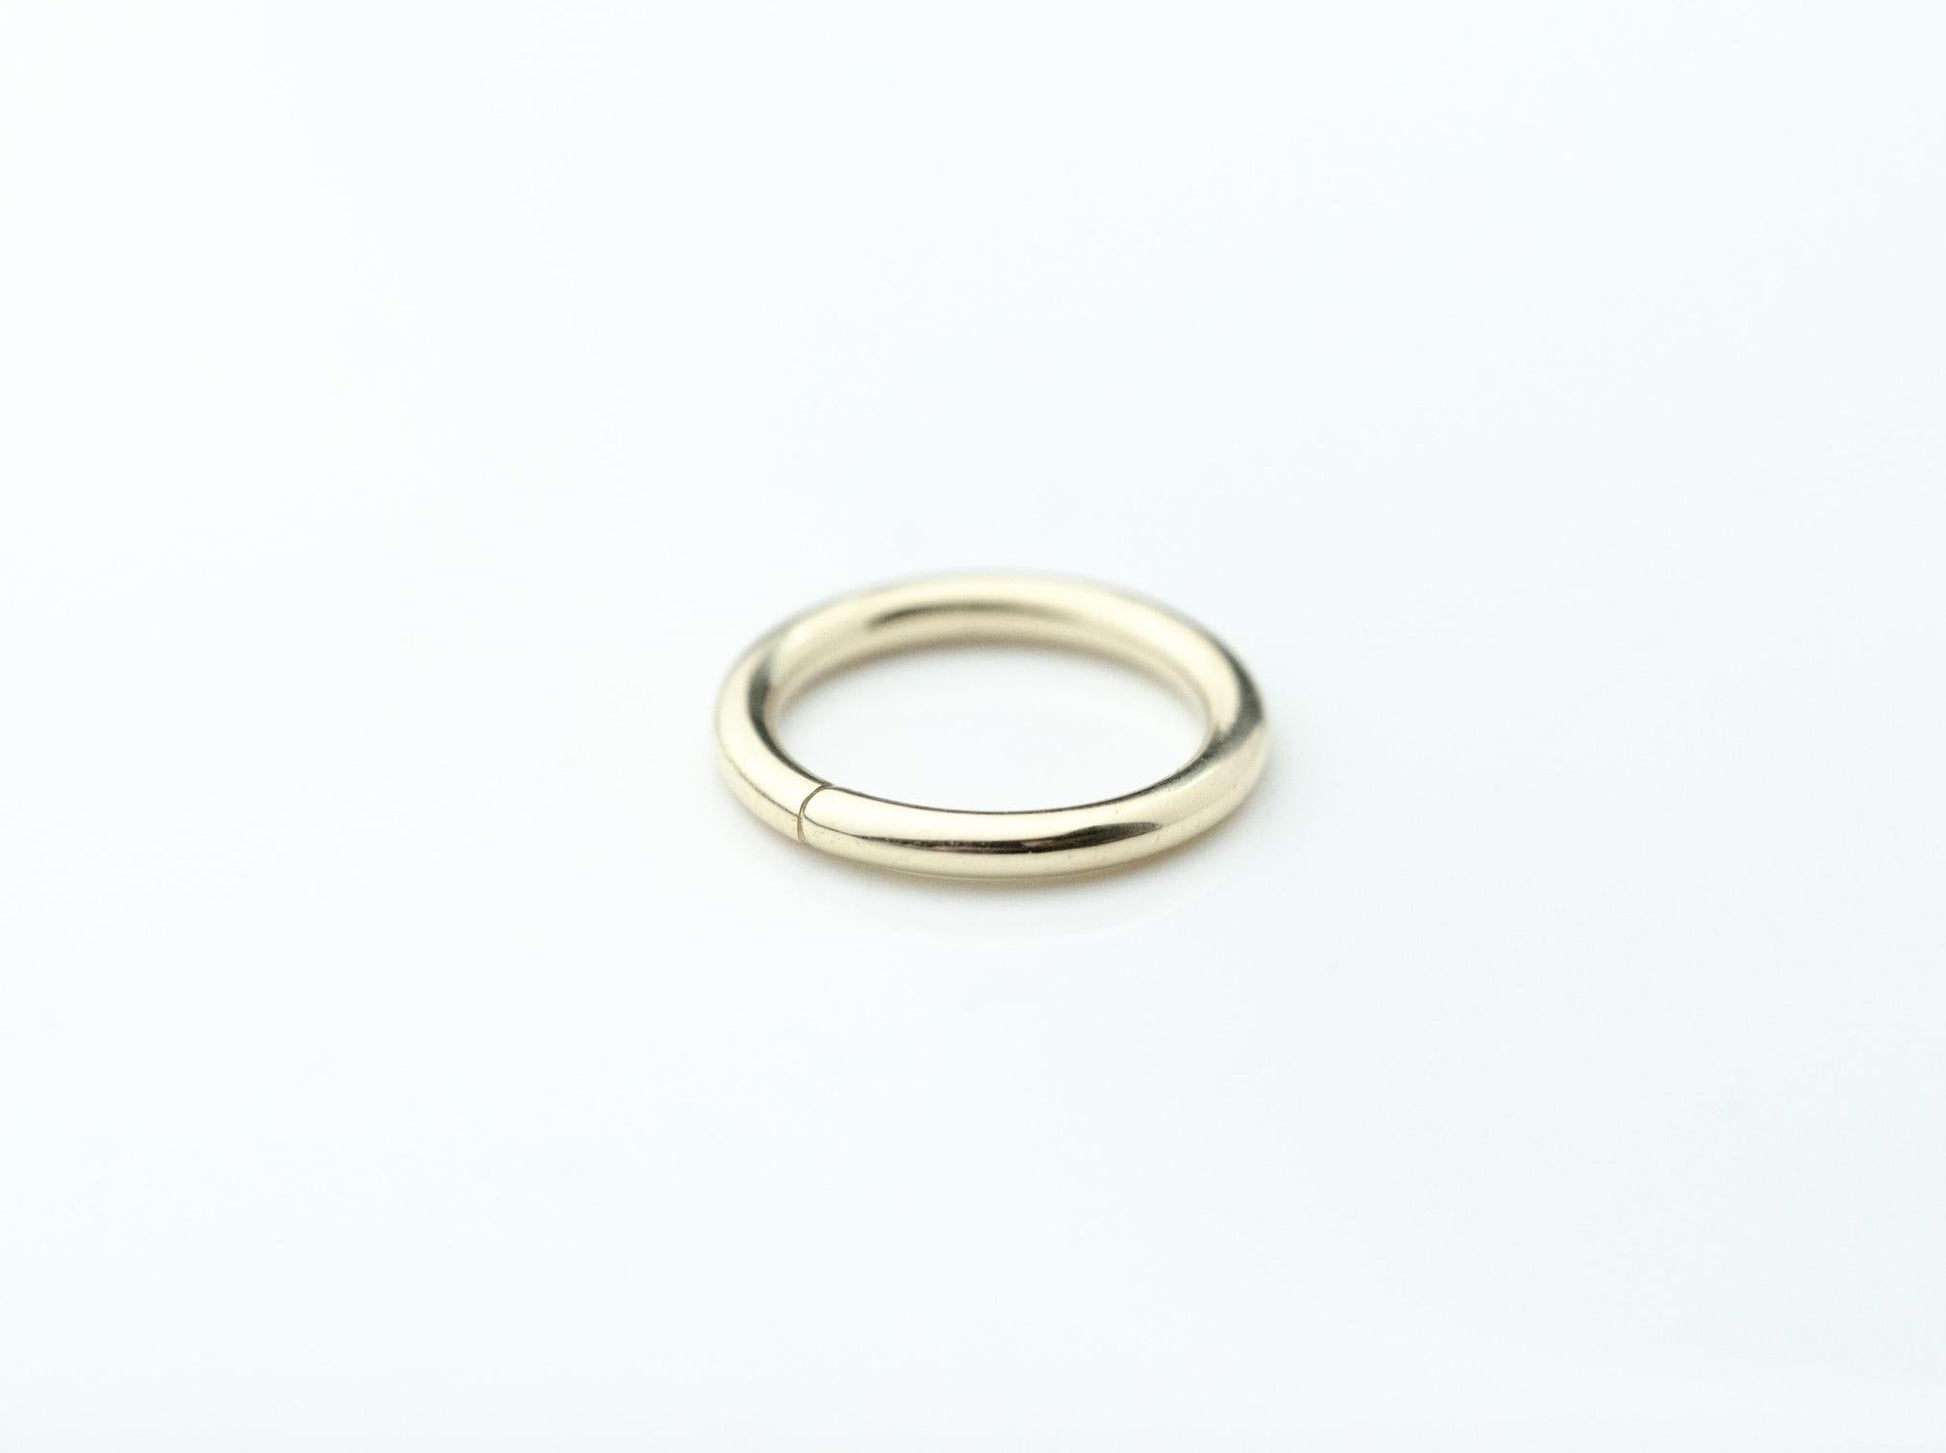 Seam Ring in 14k Yellow Gold by BVLA